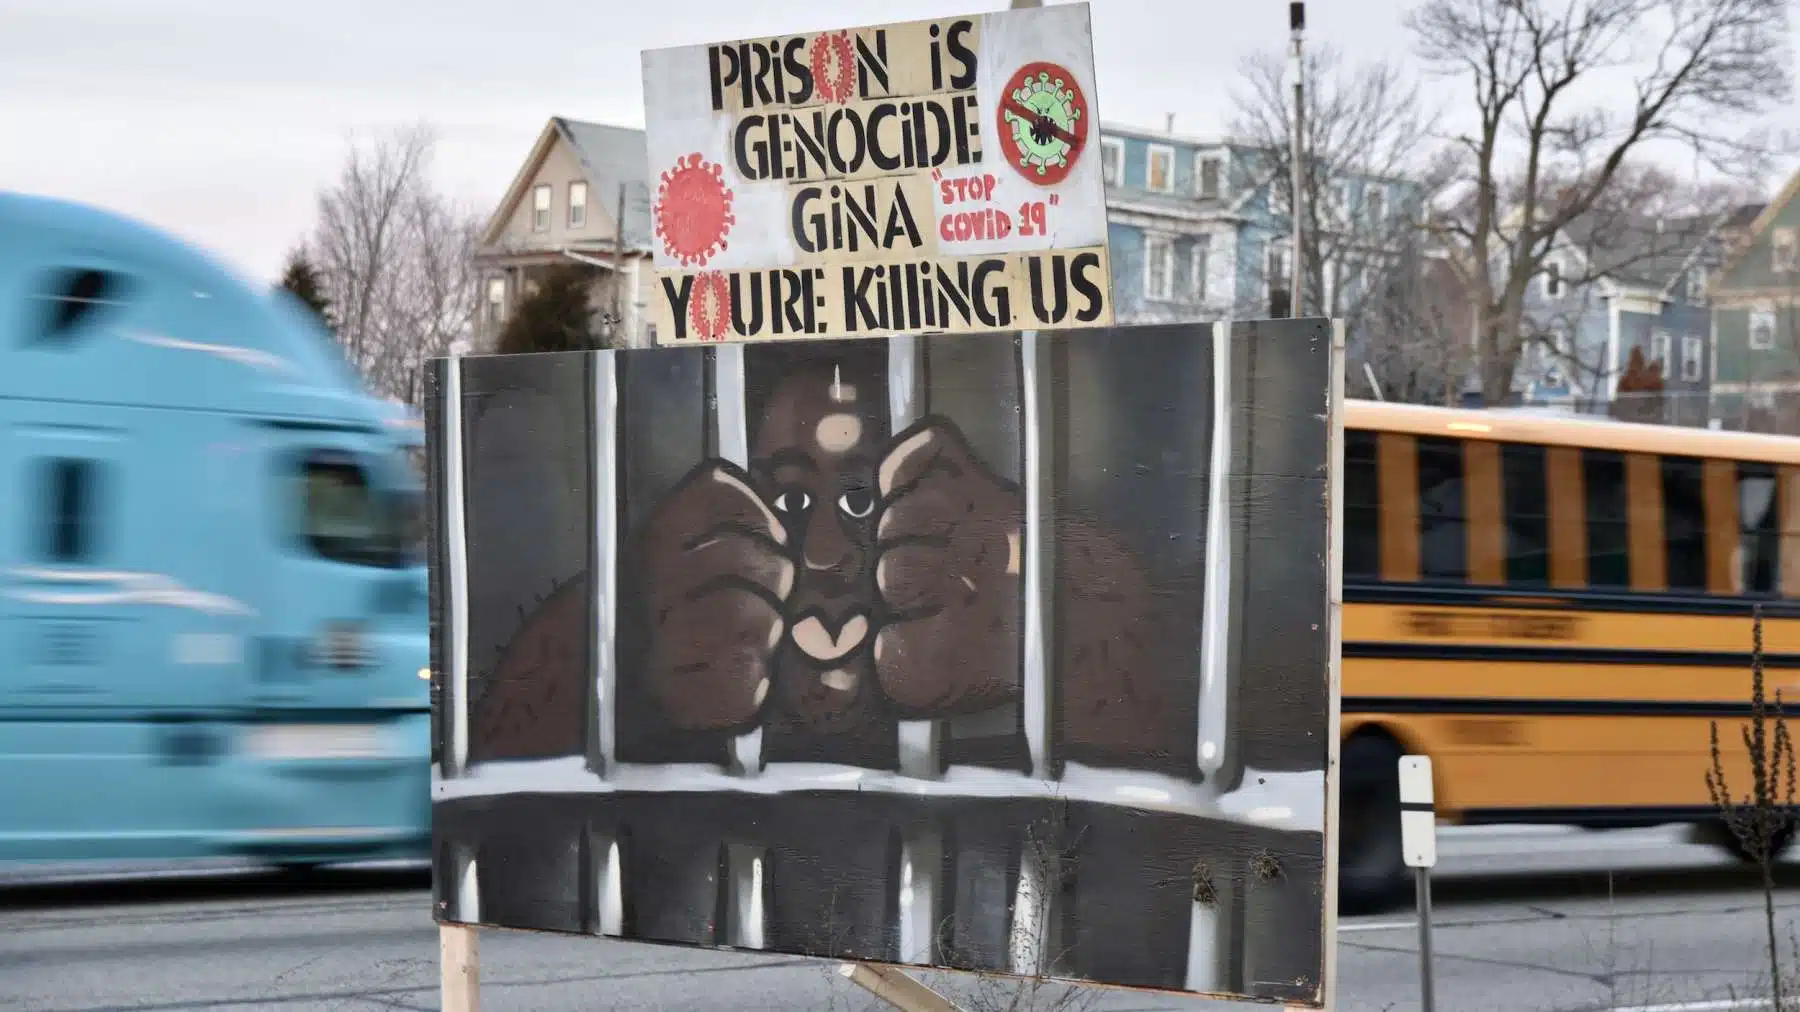 Rhode Island News: Highway signs reading “Prison is Genocide” and “Gina You’re Killing Us” placed over night